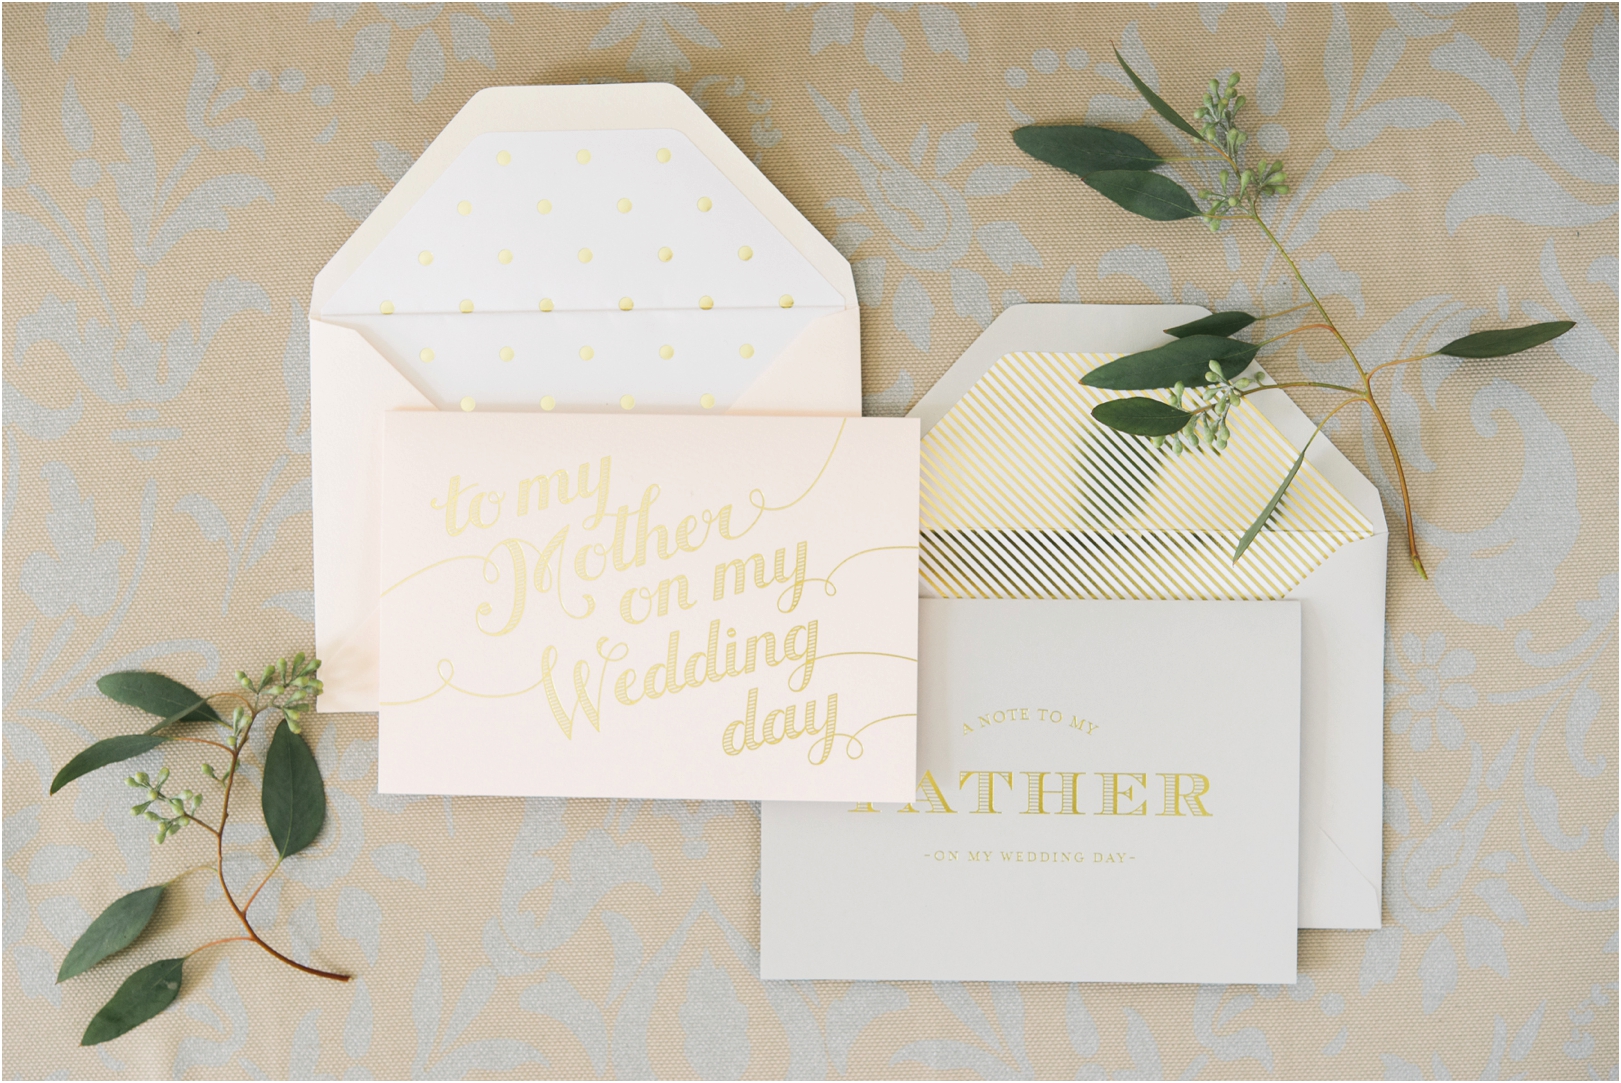 Parent thank you cards for wedding day